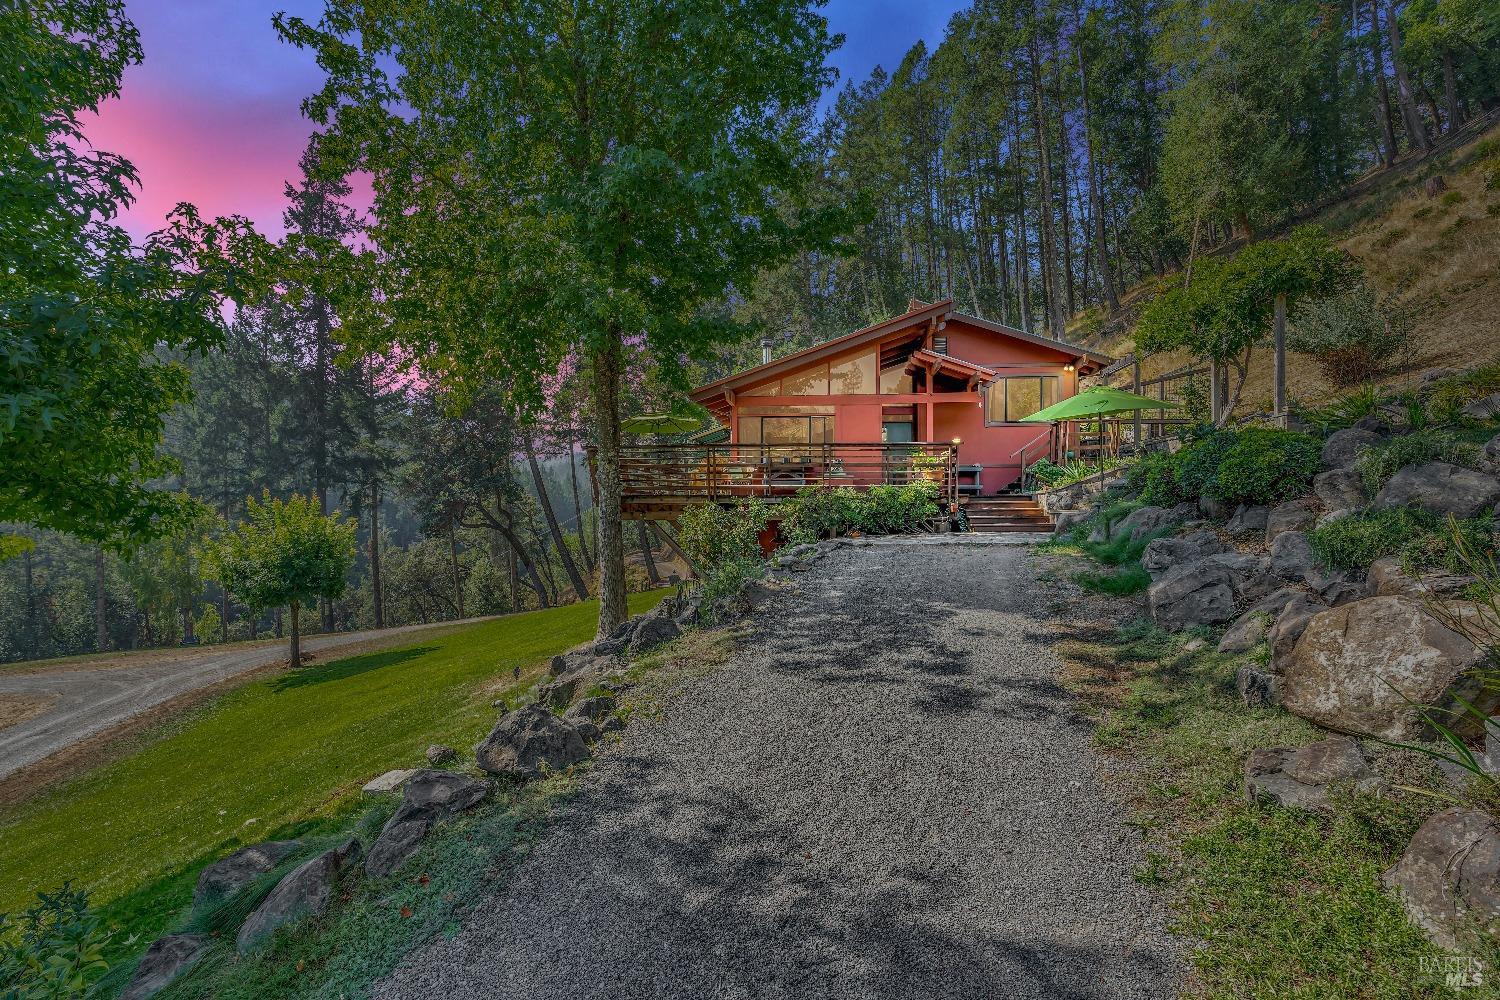 Photo of 625 Tzabaco Creek Rd in Geyserville, CA